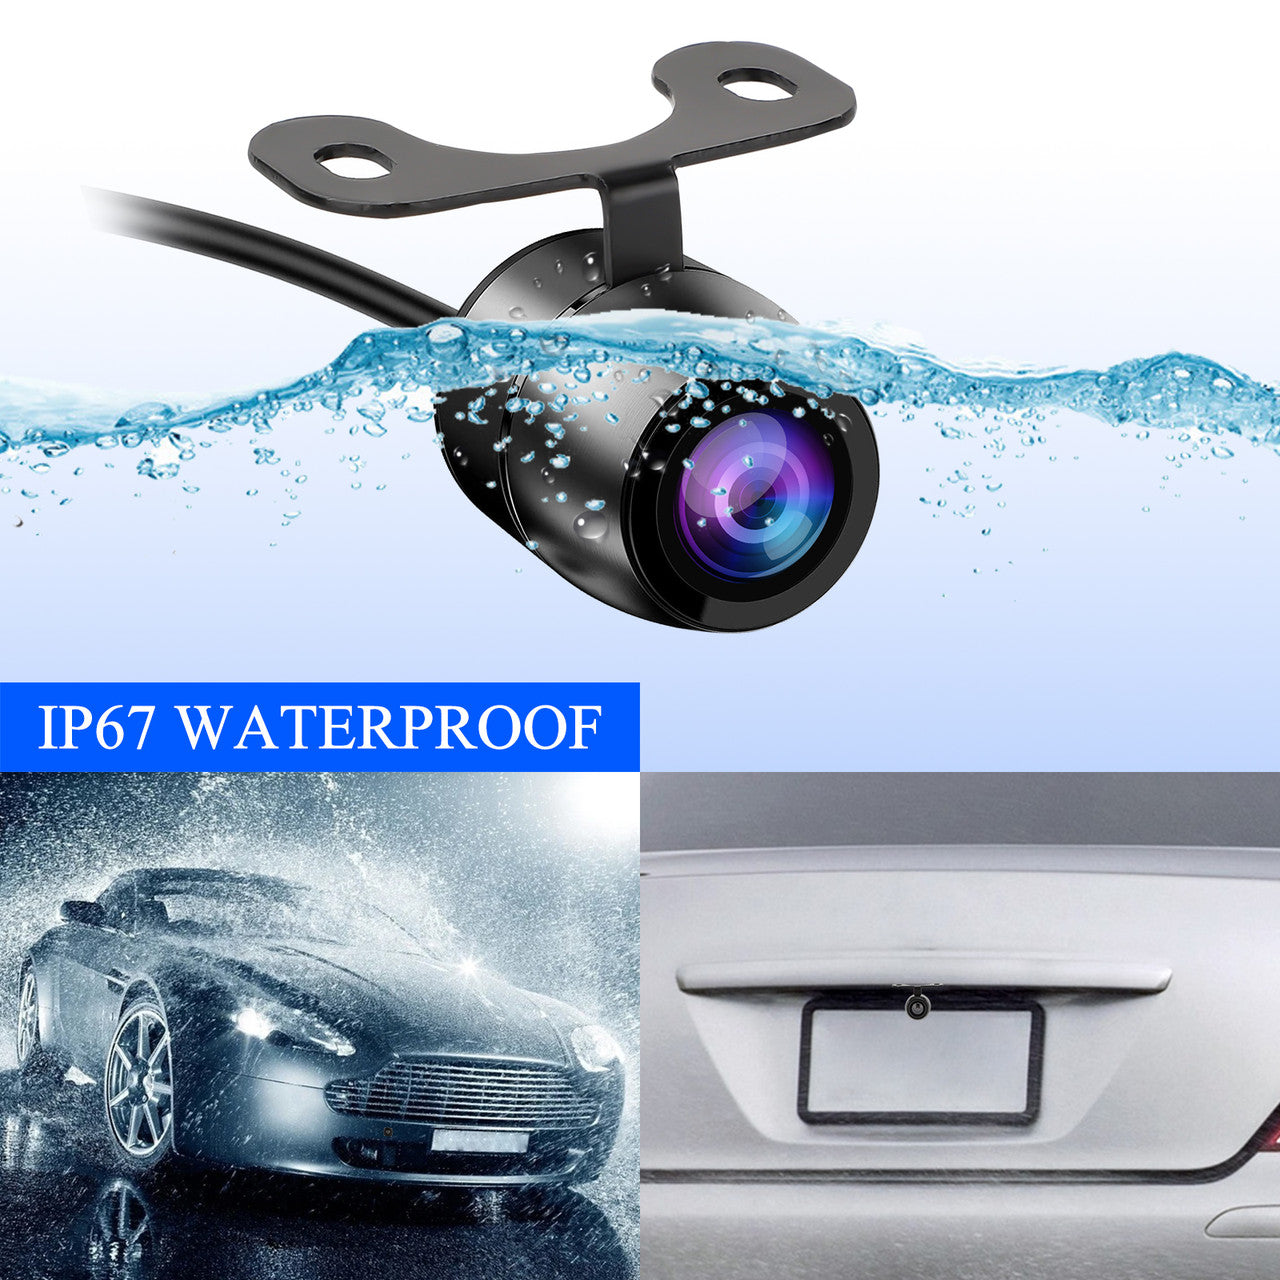 IP67 Waterproof HD Hidden License Plate Vehicle Backup Cameras, Night Vision 170掳 Wide View Angle Rear View Camera for 12V